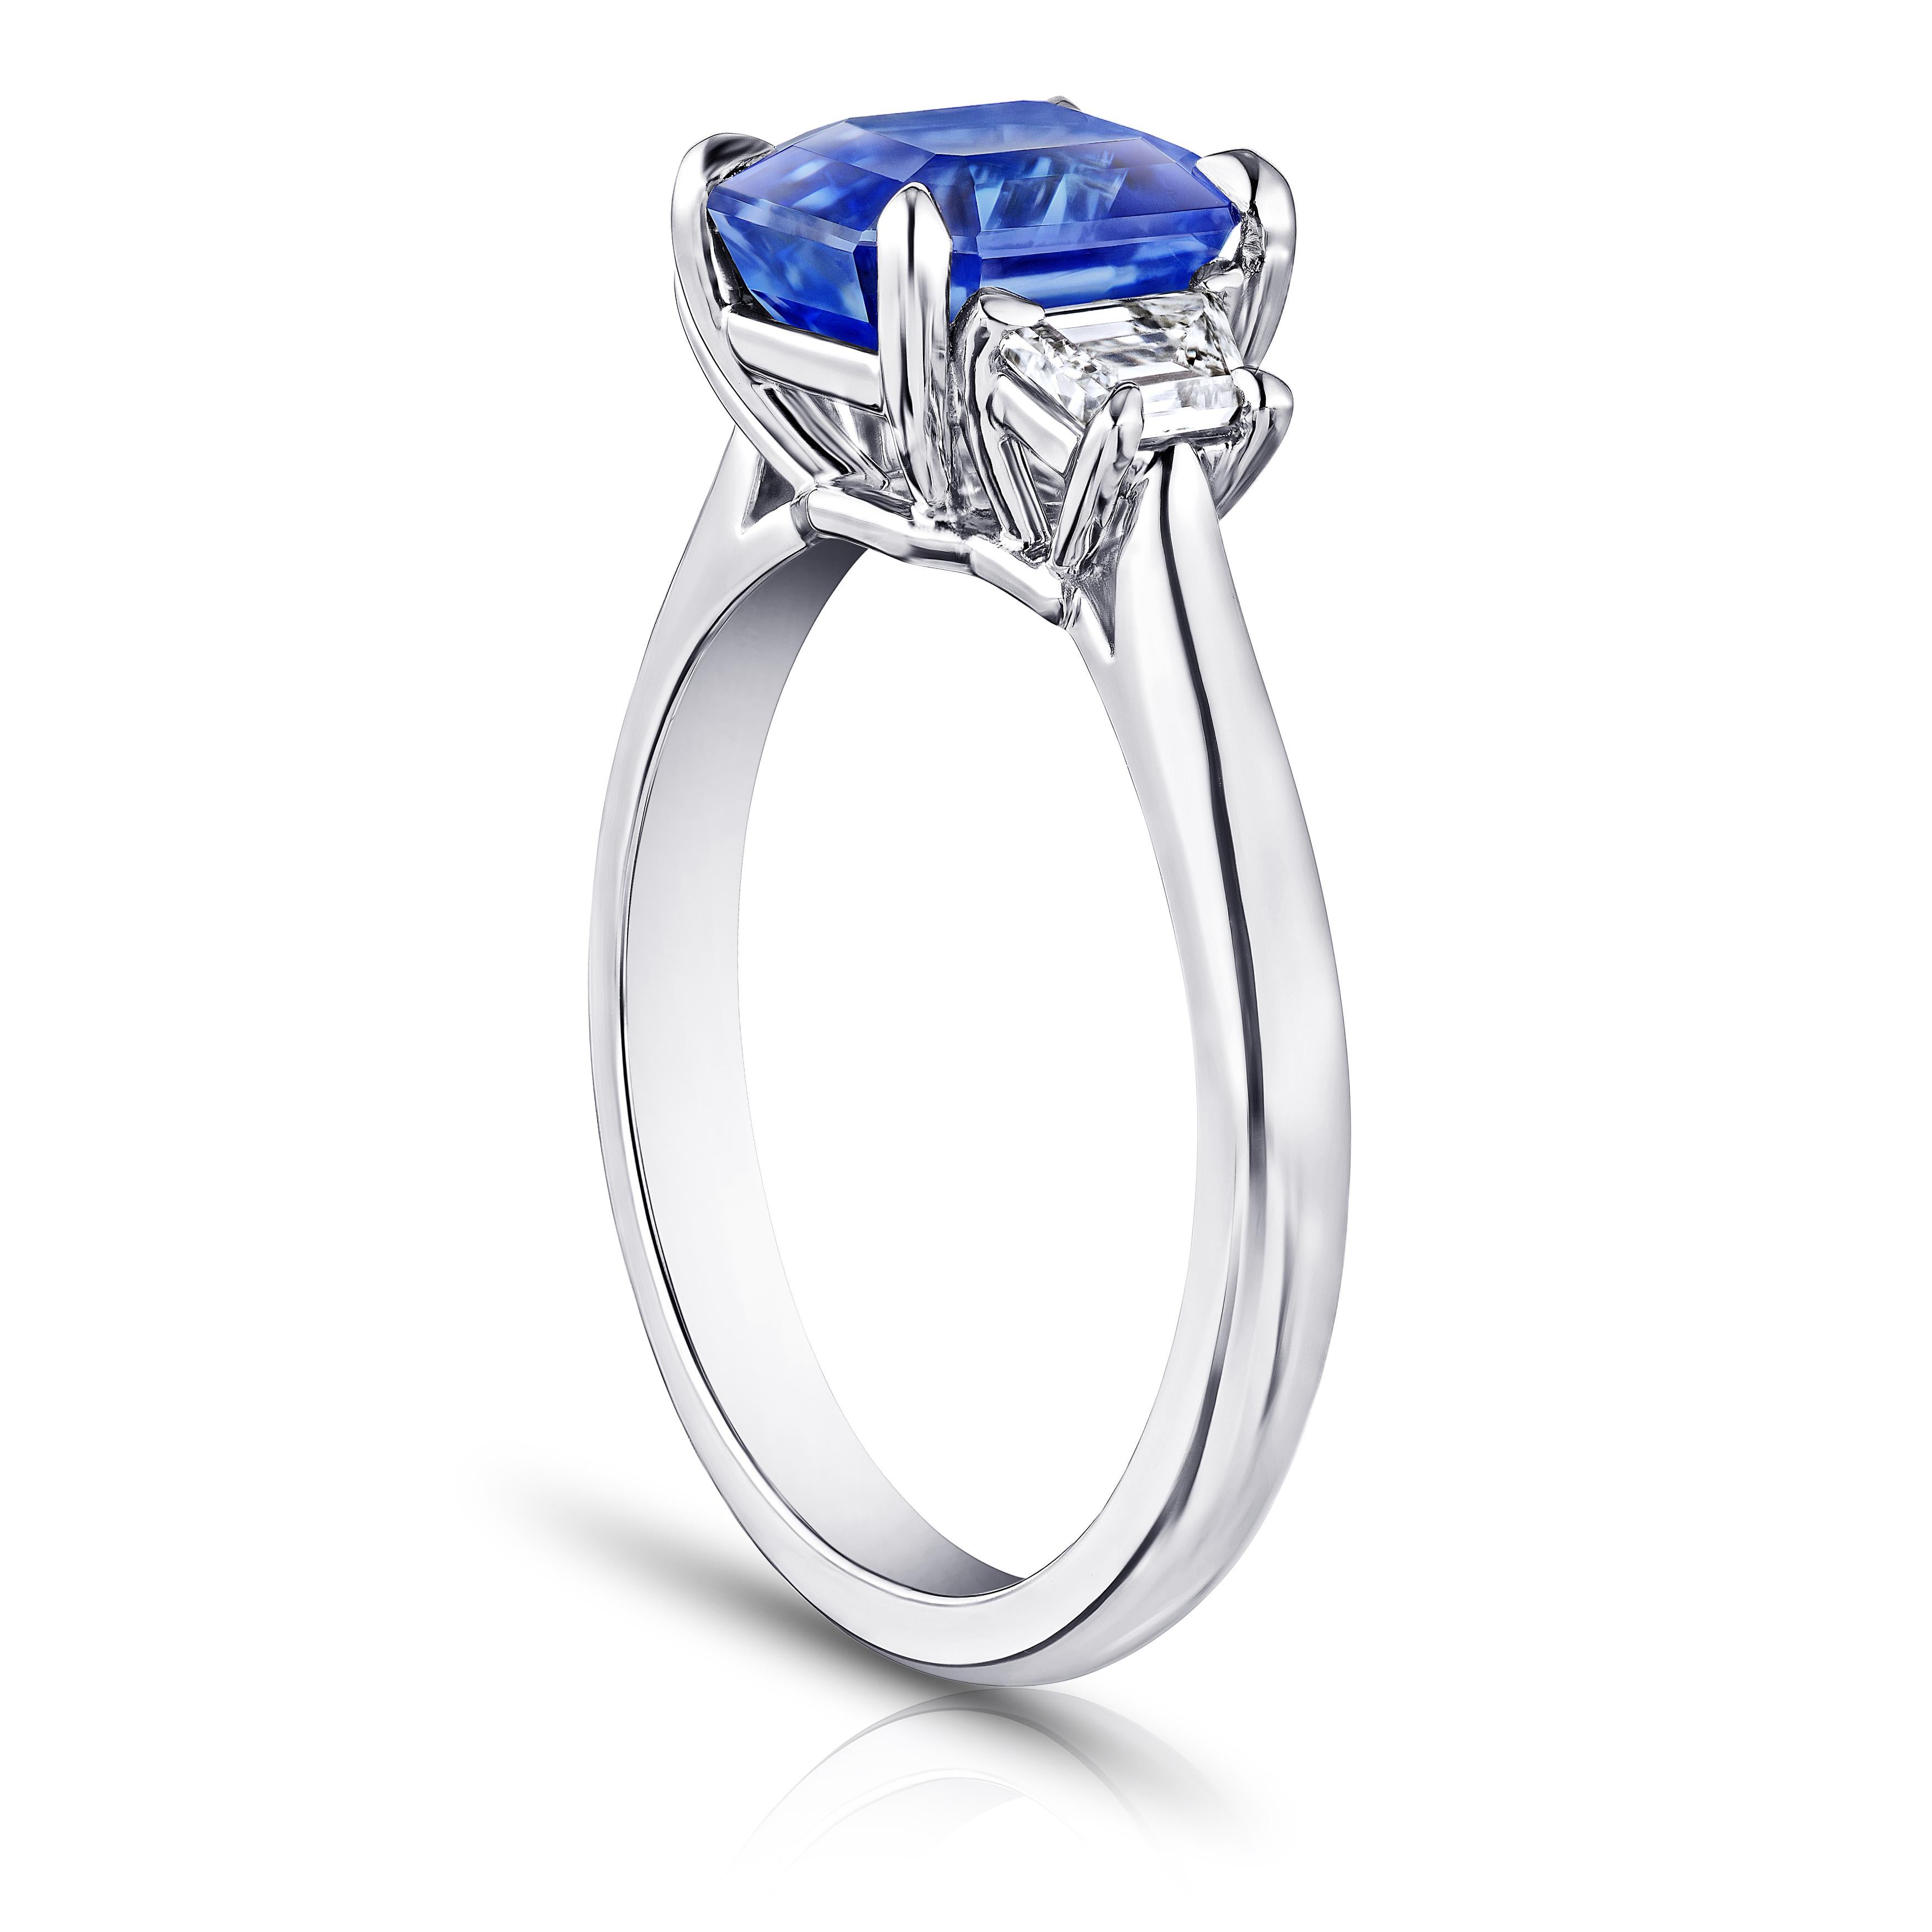 3.18 carat emerald cut light blue sapphire with trapezoid step cut diamonds .46 carats set in a platinum ring. Ring is currently a size 7. Free resizing to you finger size.  